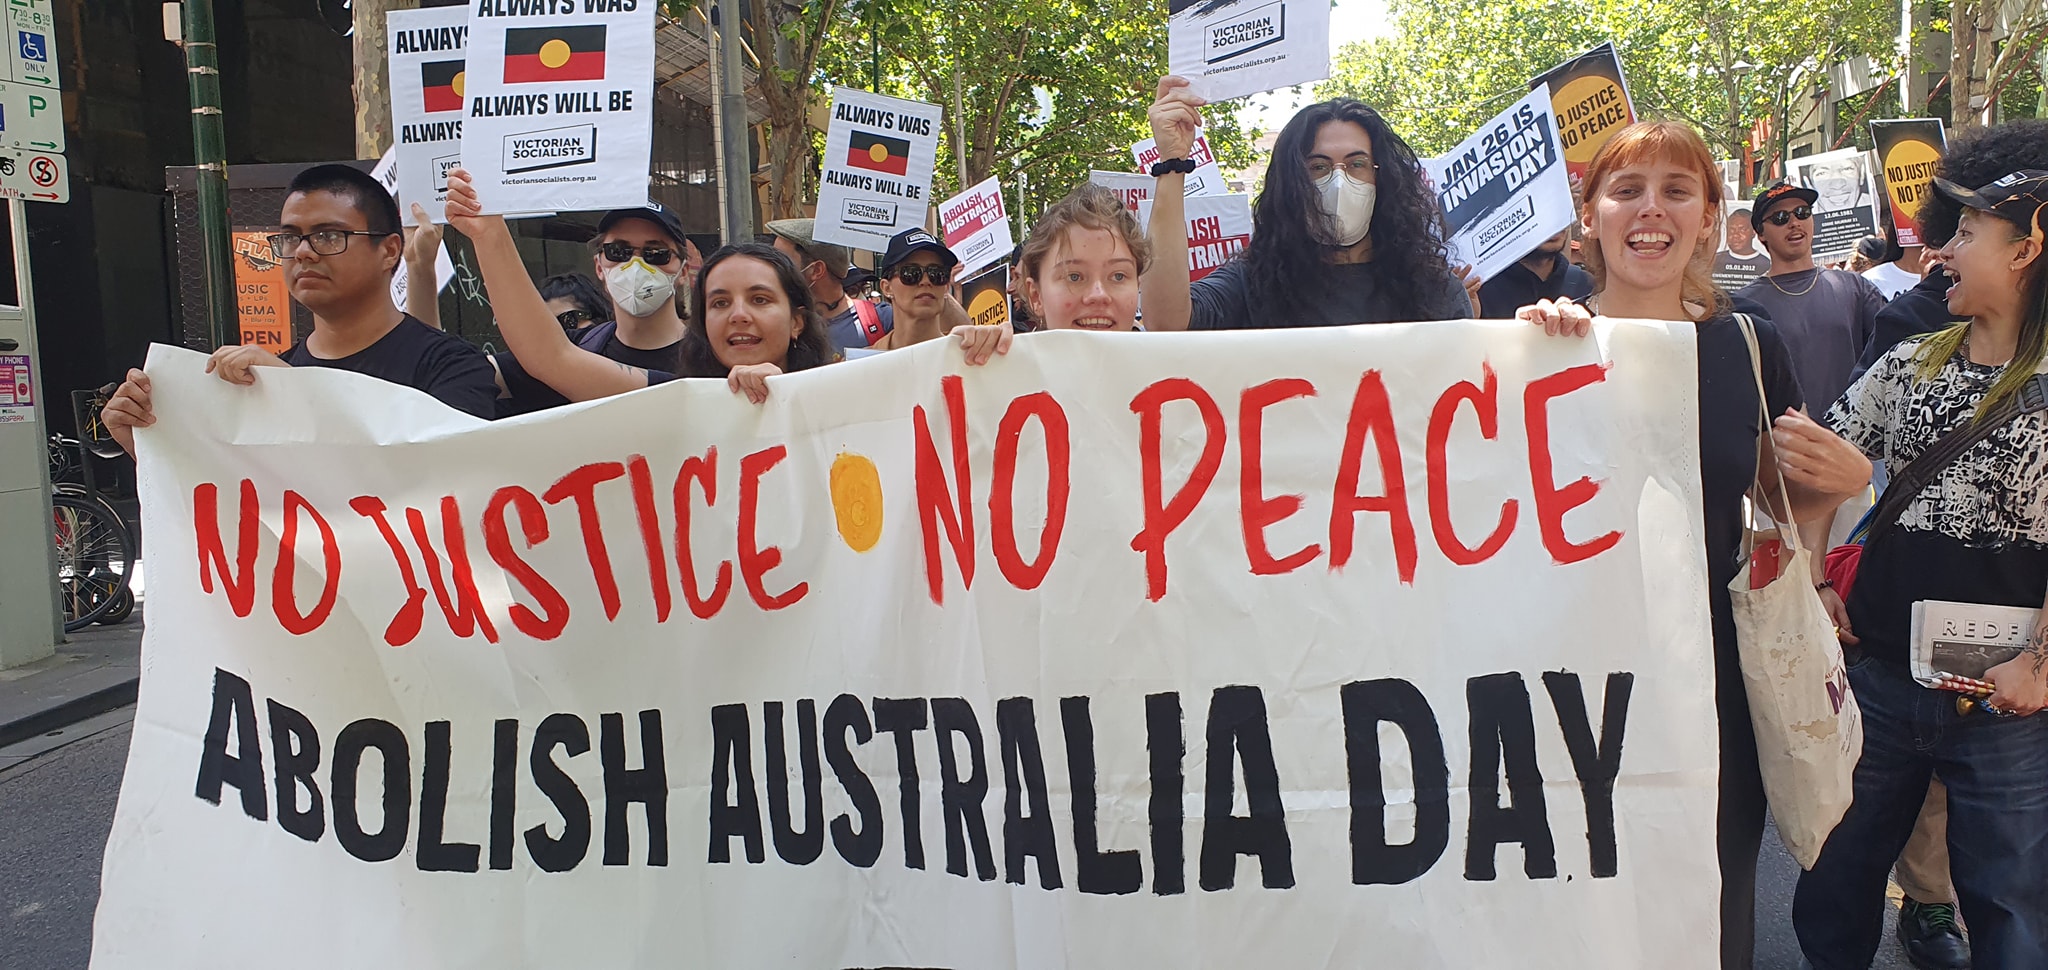 Victorian Socialists members march on Invasion Day